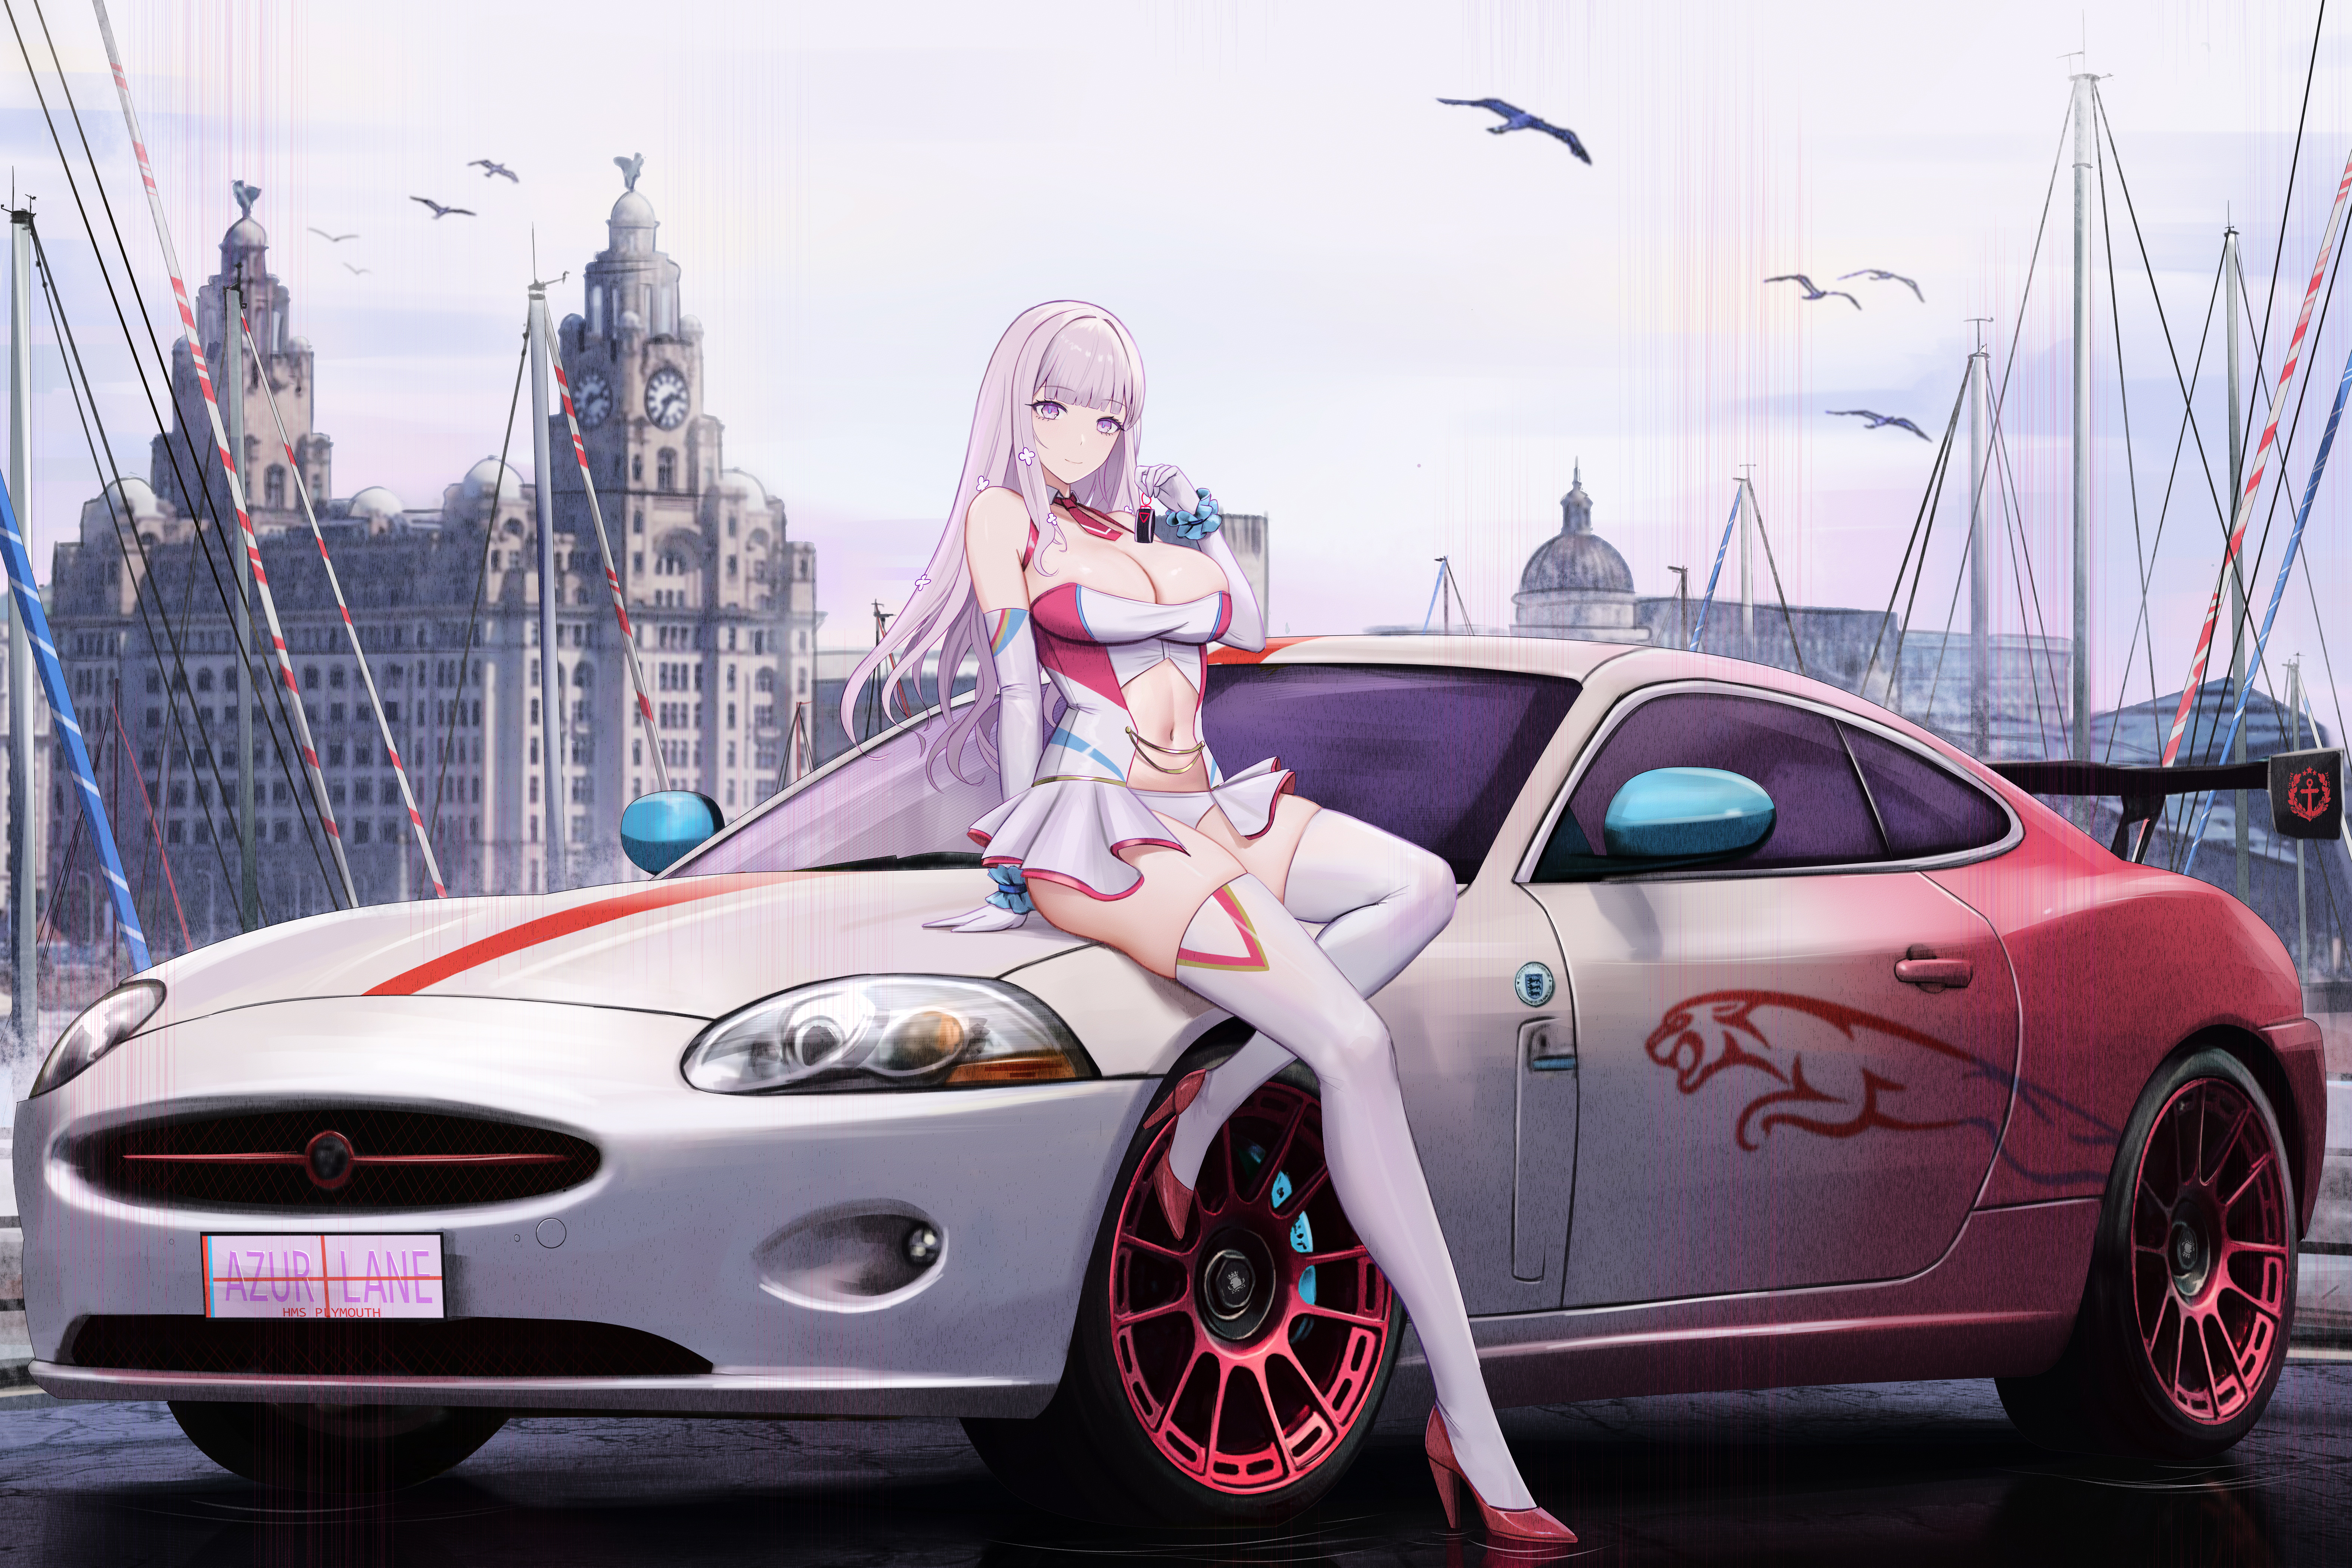 Anime 6300x4200 anime anime girls Plymouth (Azur Lane) Azur Lane car gradient frontal view building clock tower stockings heels elbow gloves long hair sky looking at viewer smiling birds animals belly button big boobs cleavage Jaguar (car) bright